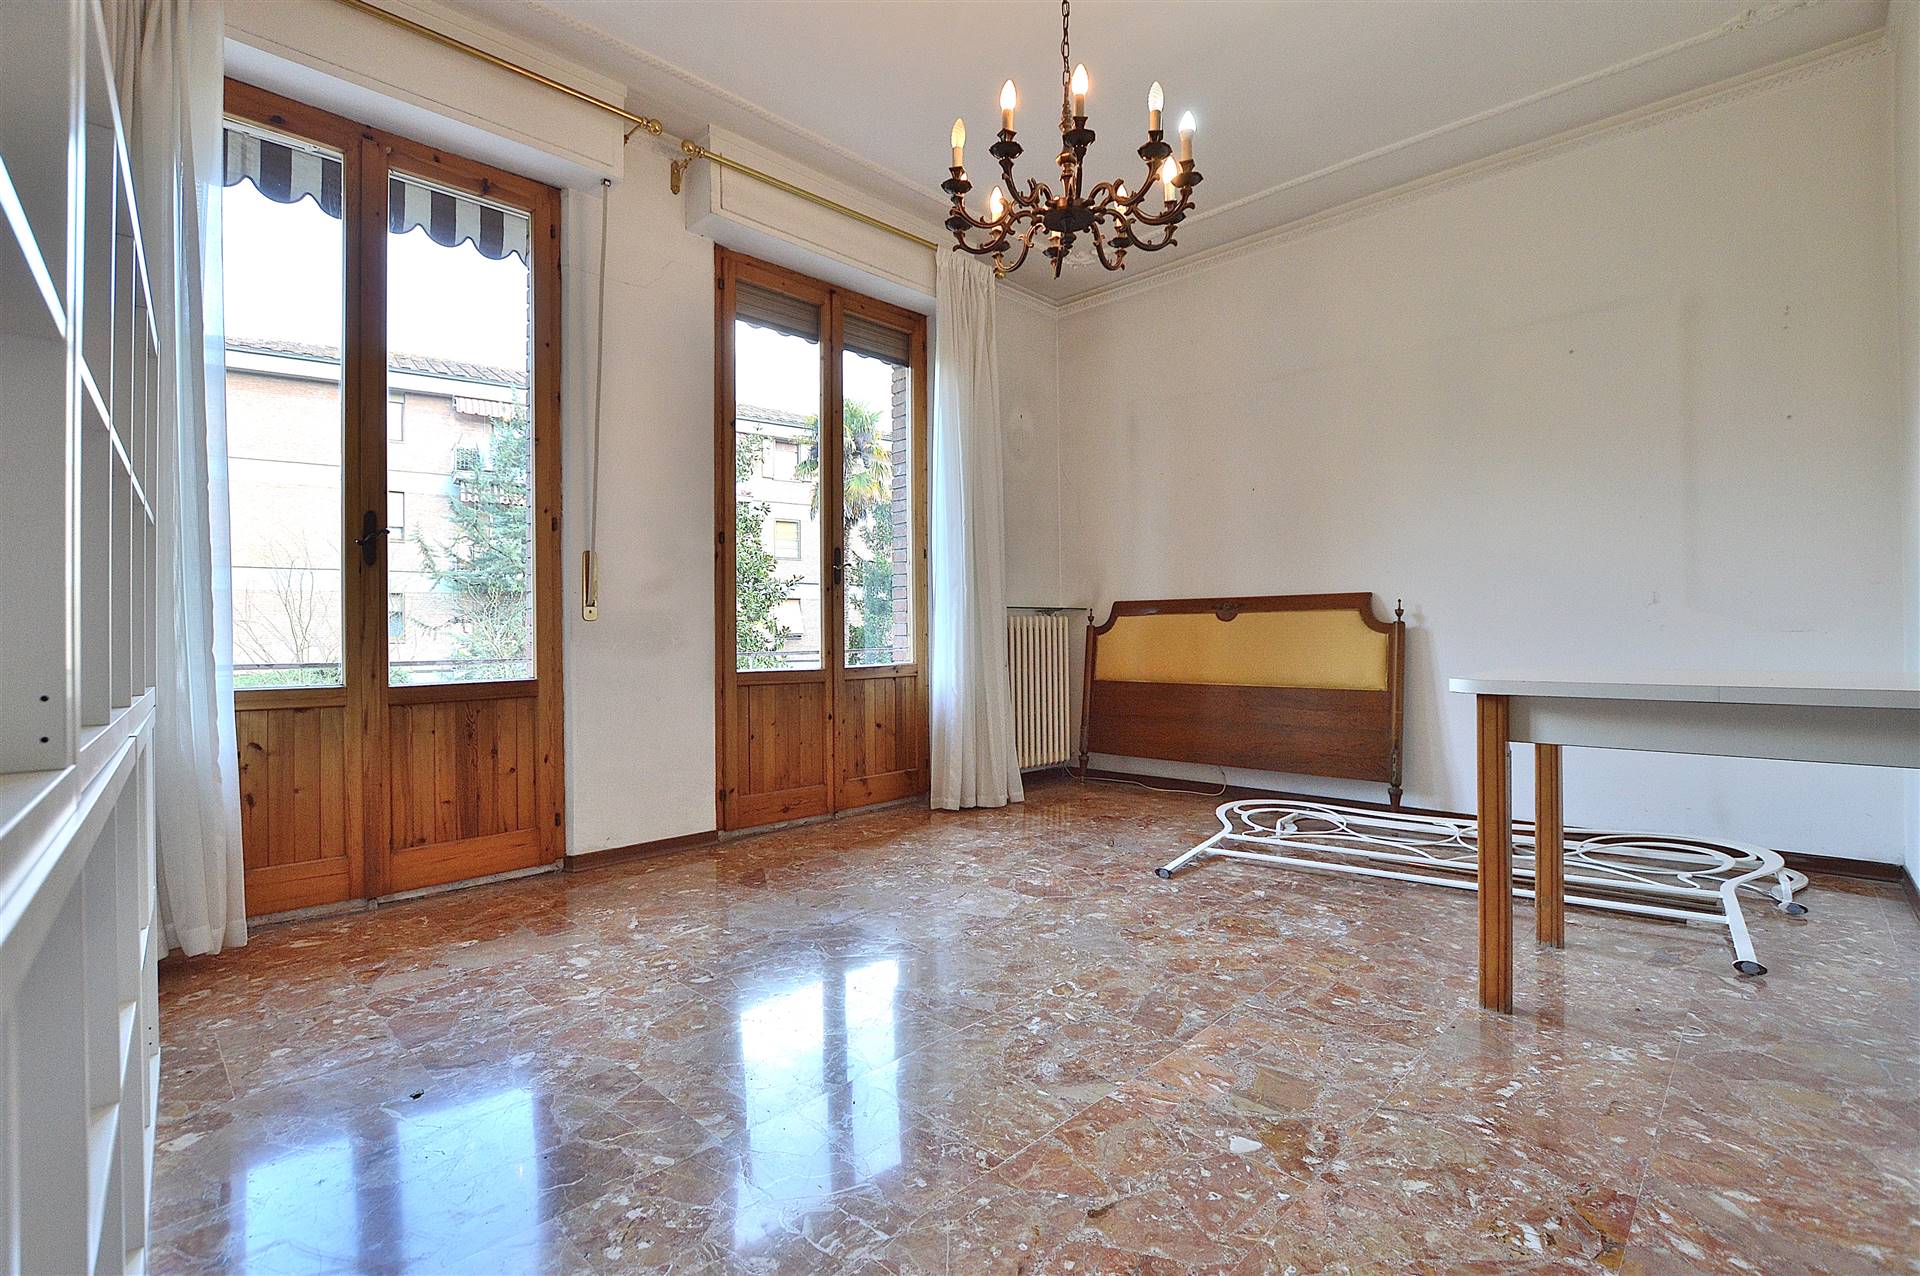 ACQUACALDA, SIENA, Apartment for sale of 108 Sq. mt., Habitable, Heating Individual heating system, Energetic class: G, Epi: 175 kwh/m2 year, placed 